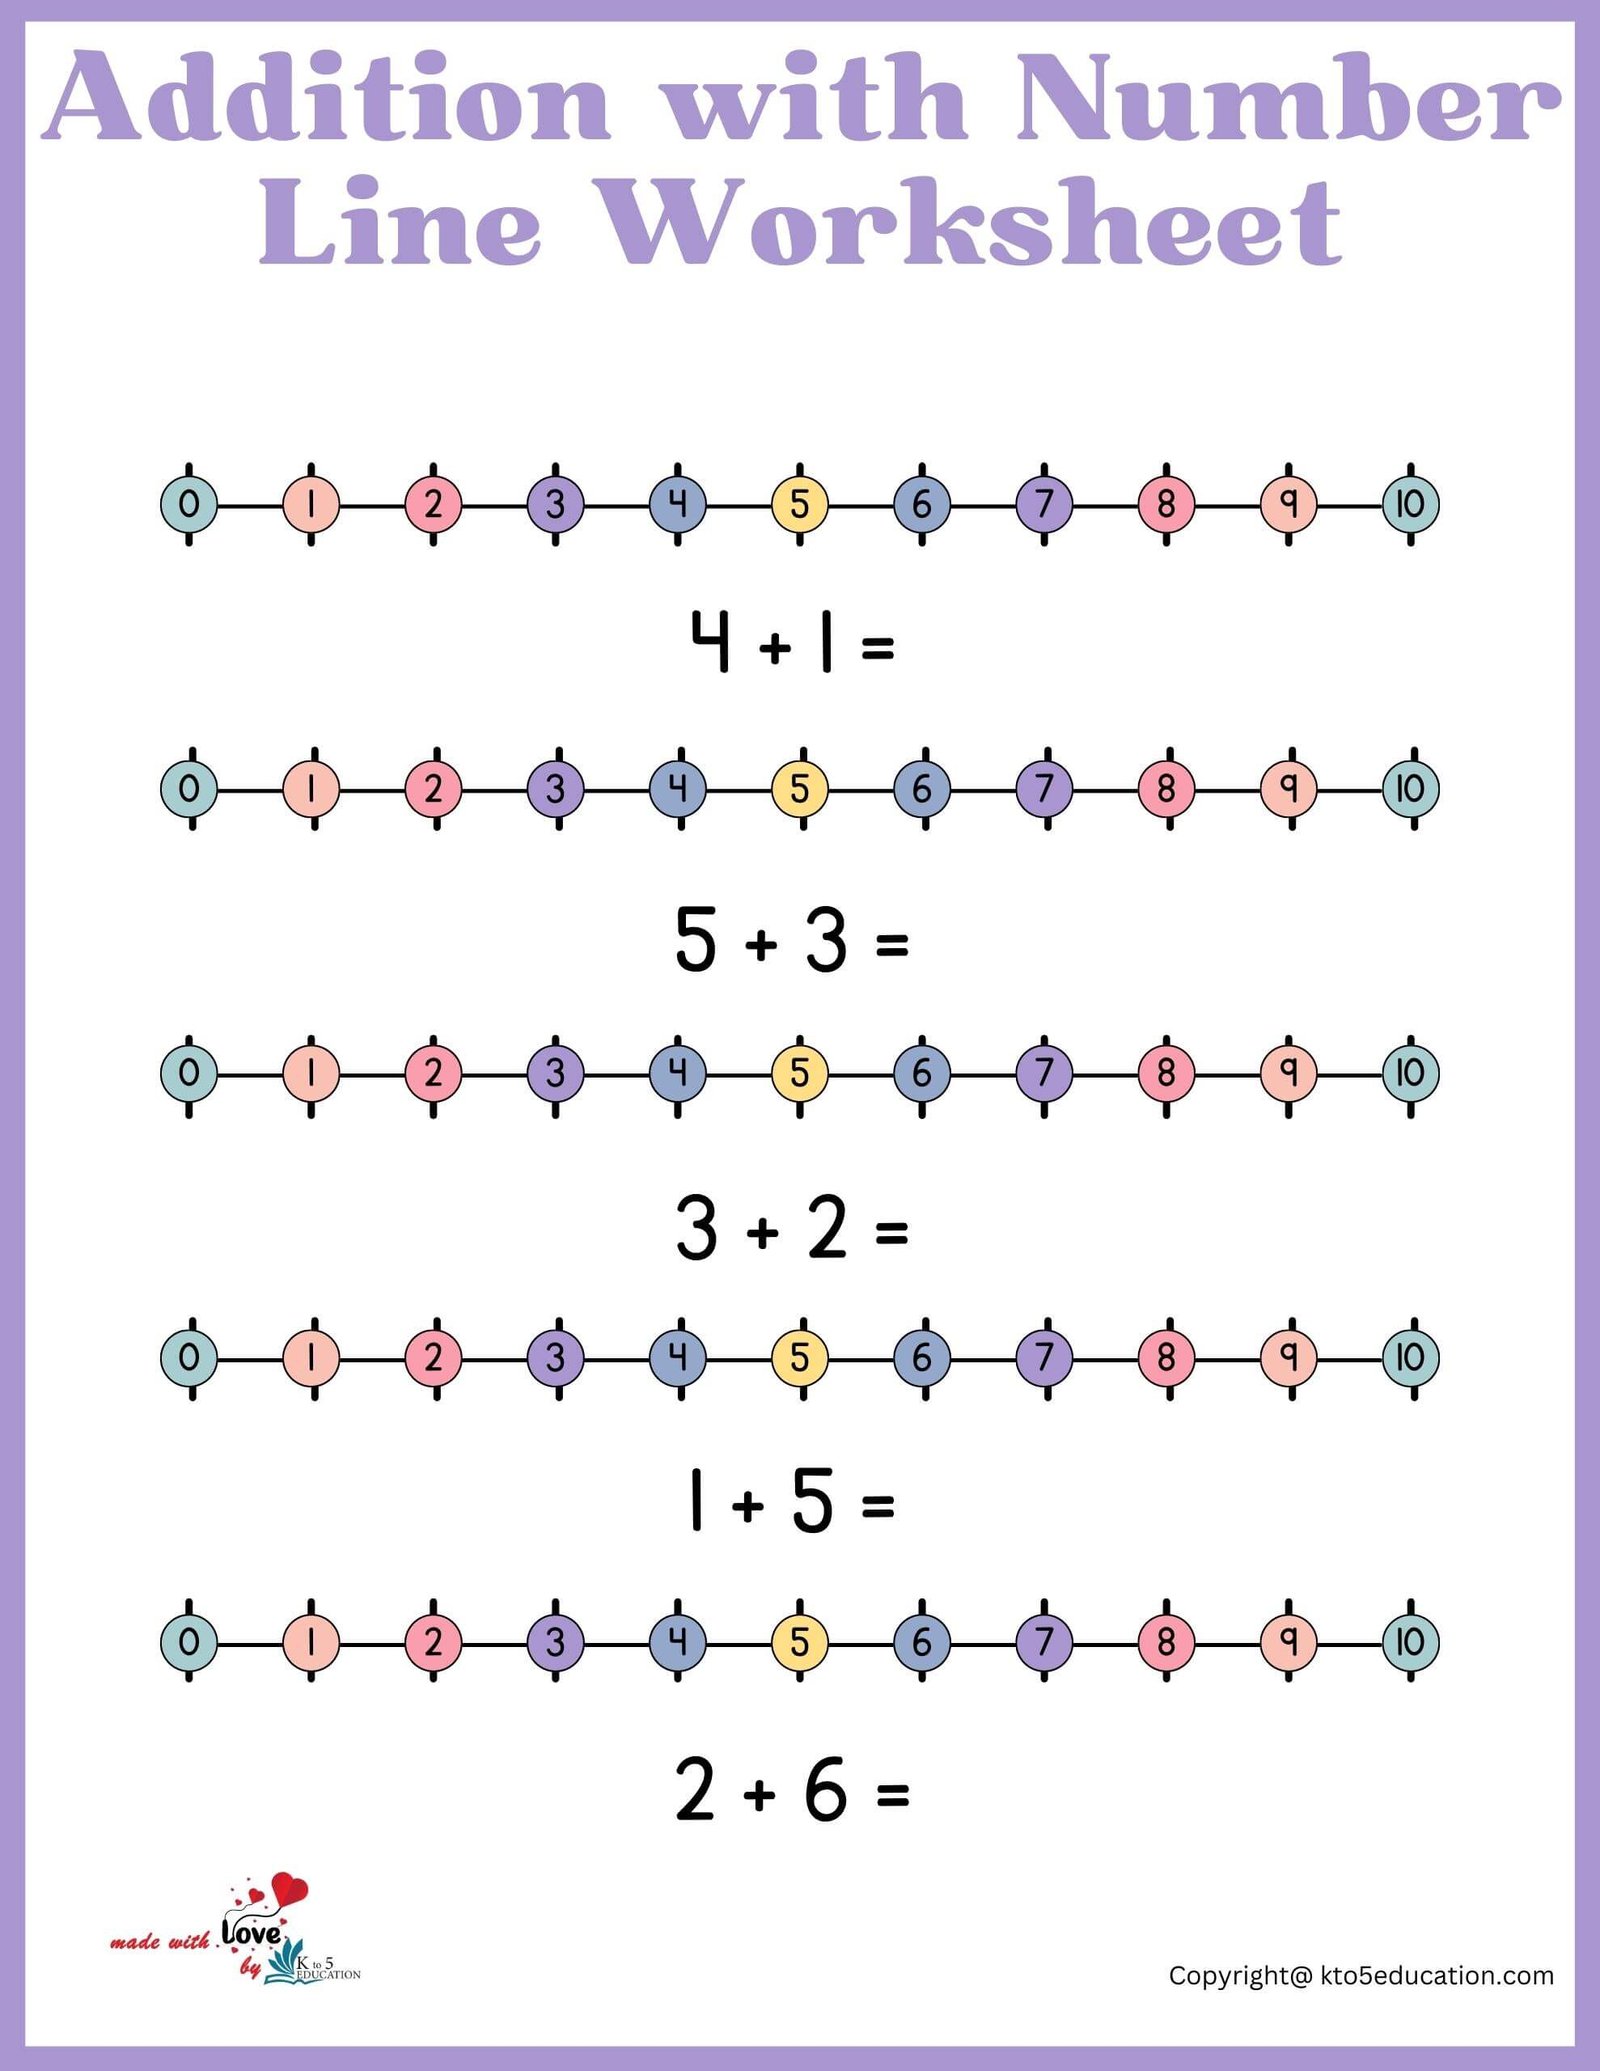 Free Addition With Number Line Printable Worksheet